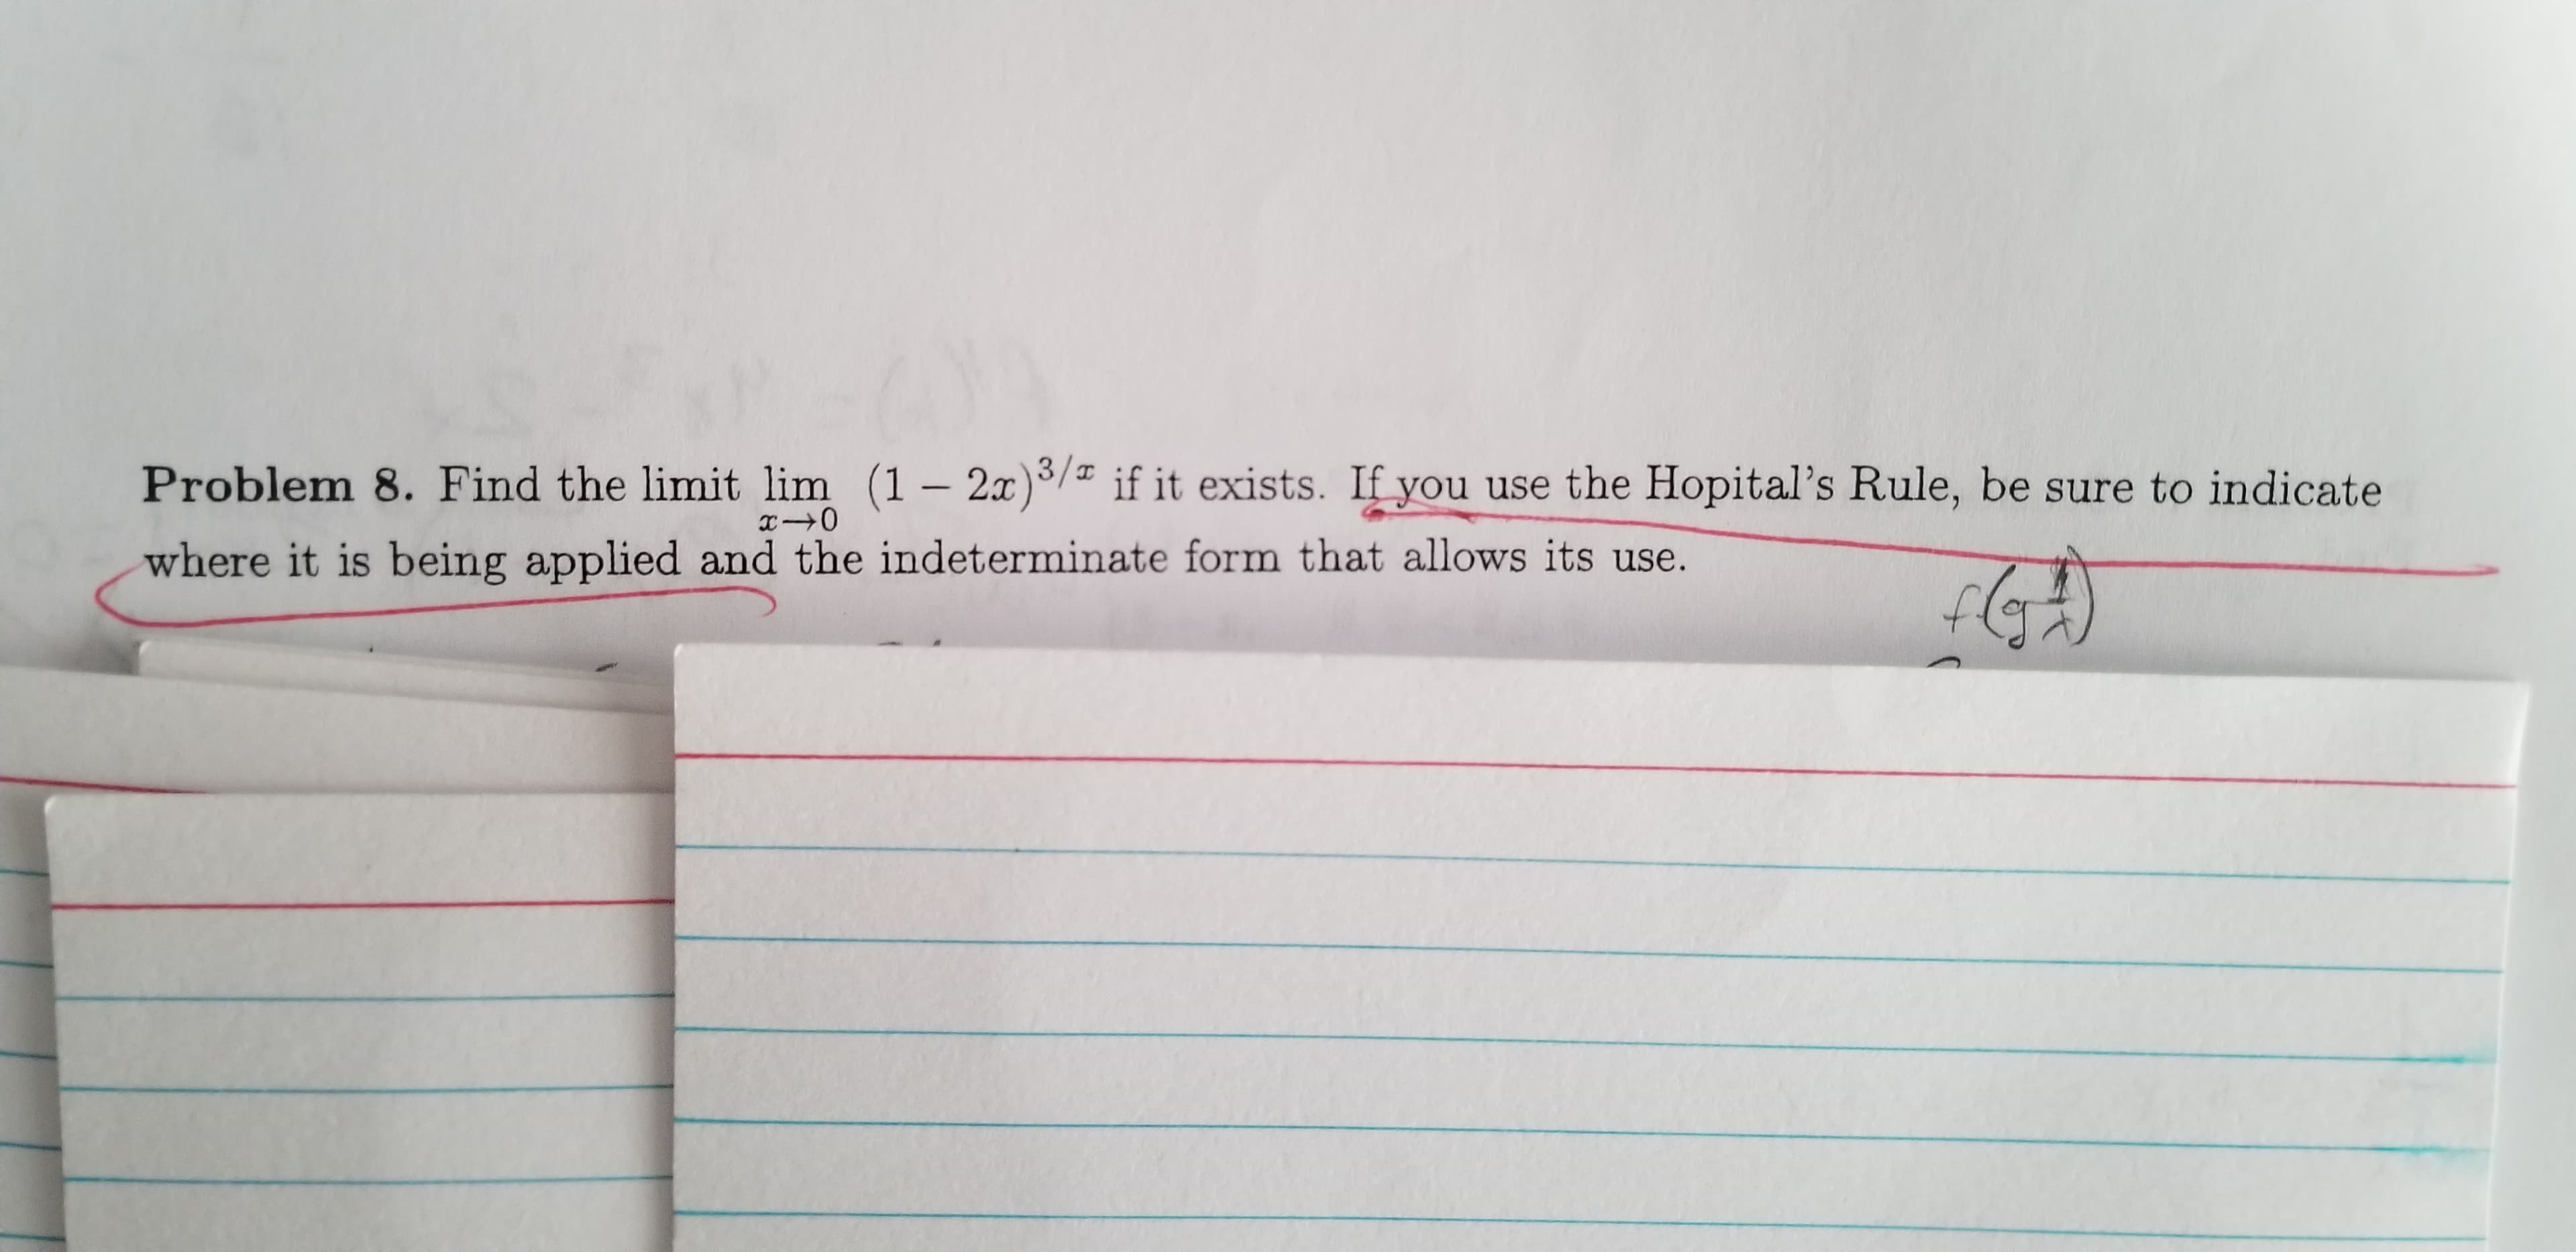 Problem 8. Find the limit lim (1- 2x)/ if it exists. If you use the Hopital's Rule, be sure to indicate
where it is being applied and the indeterminate form that allows its use.
